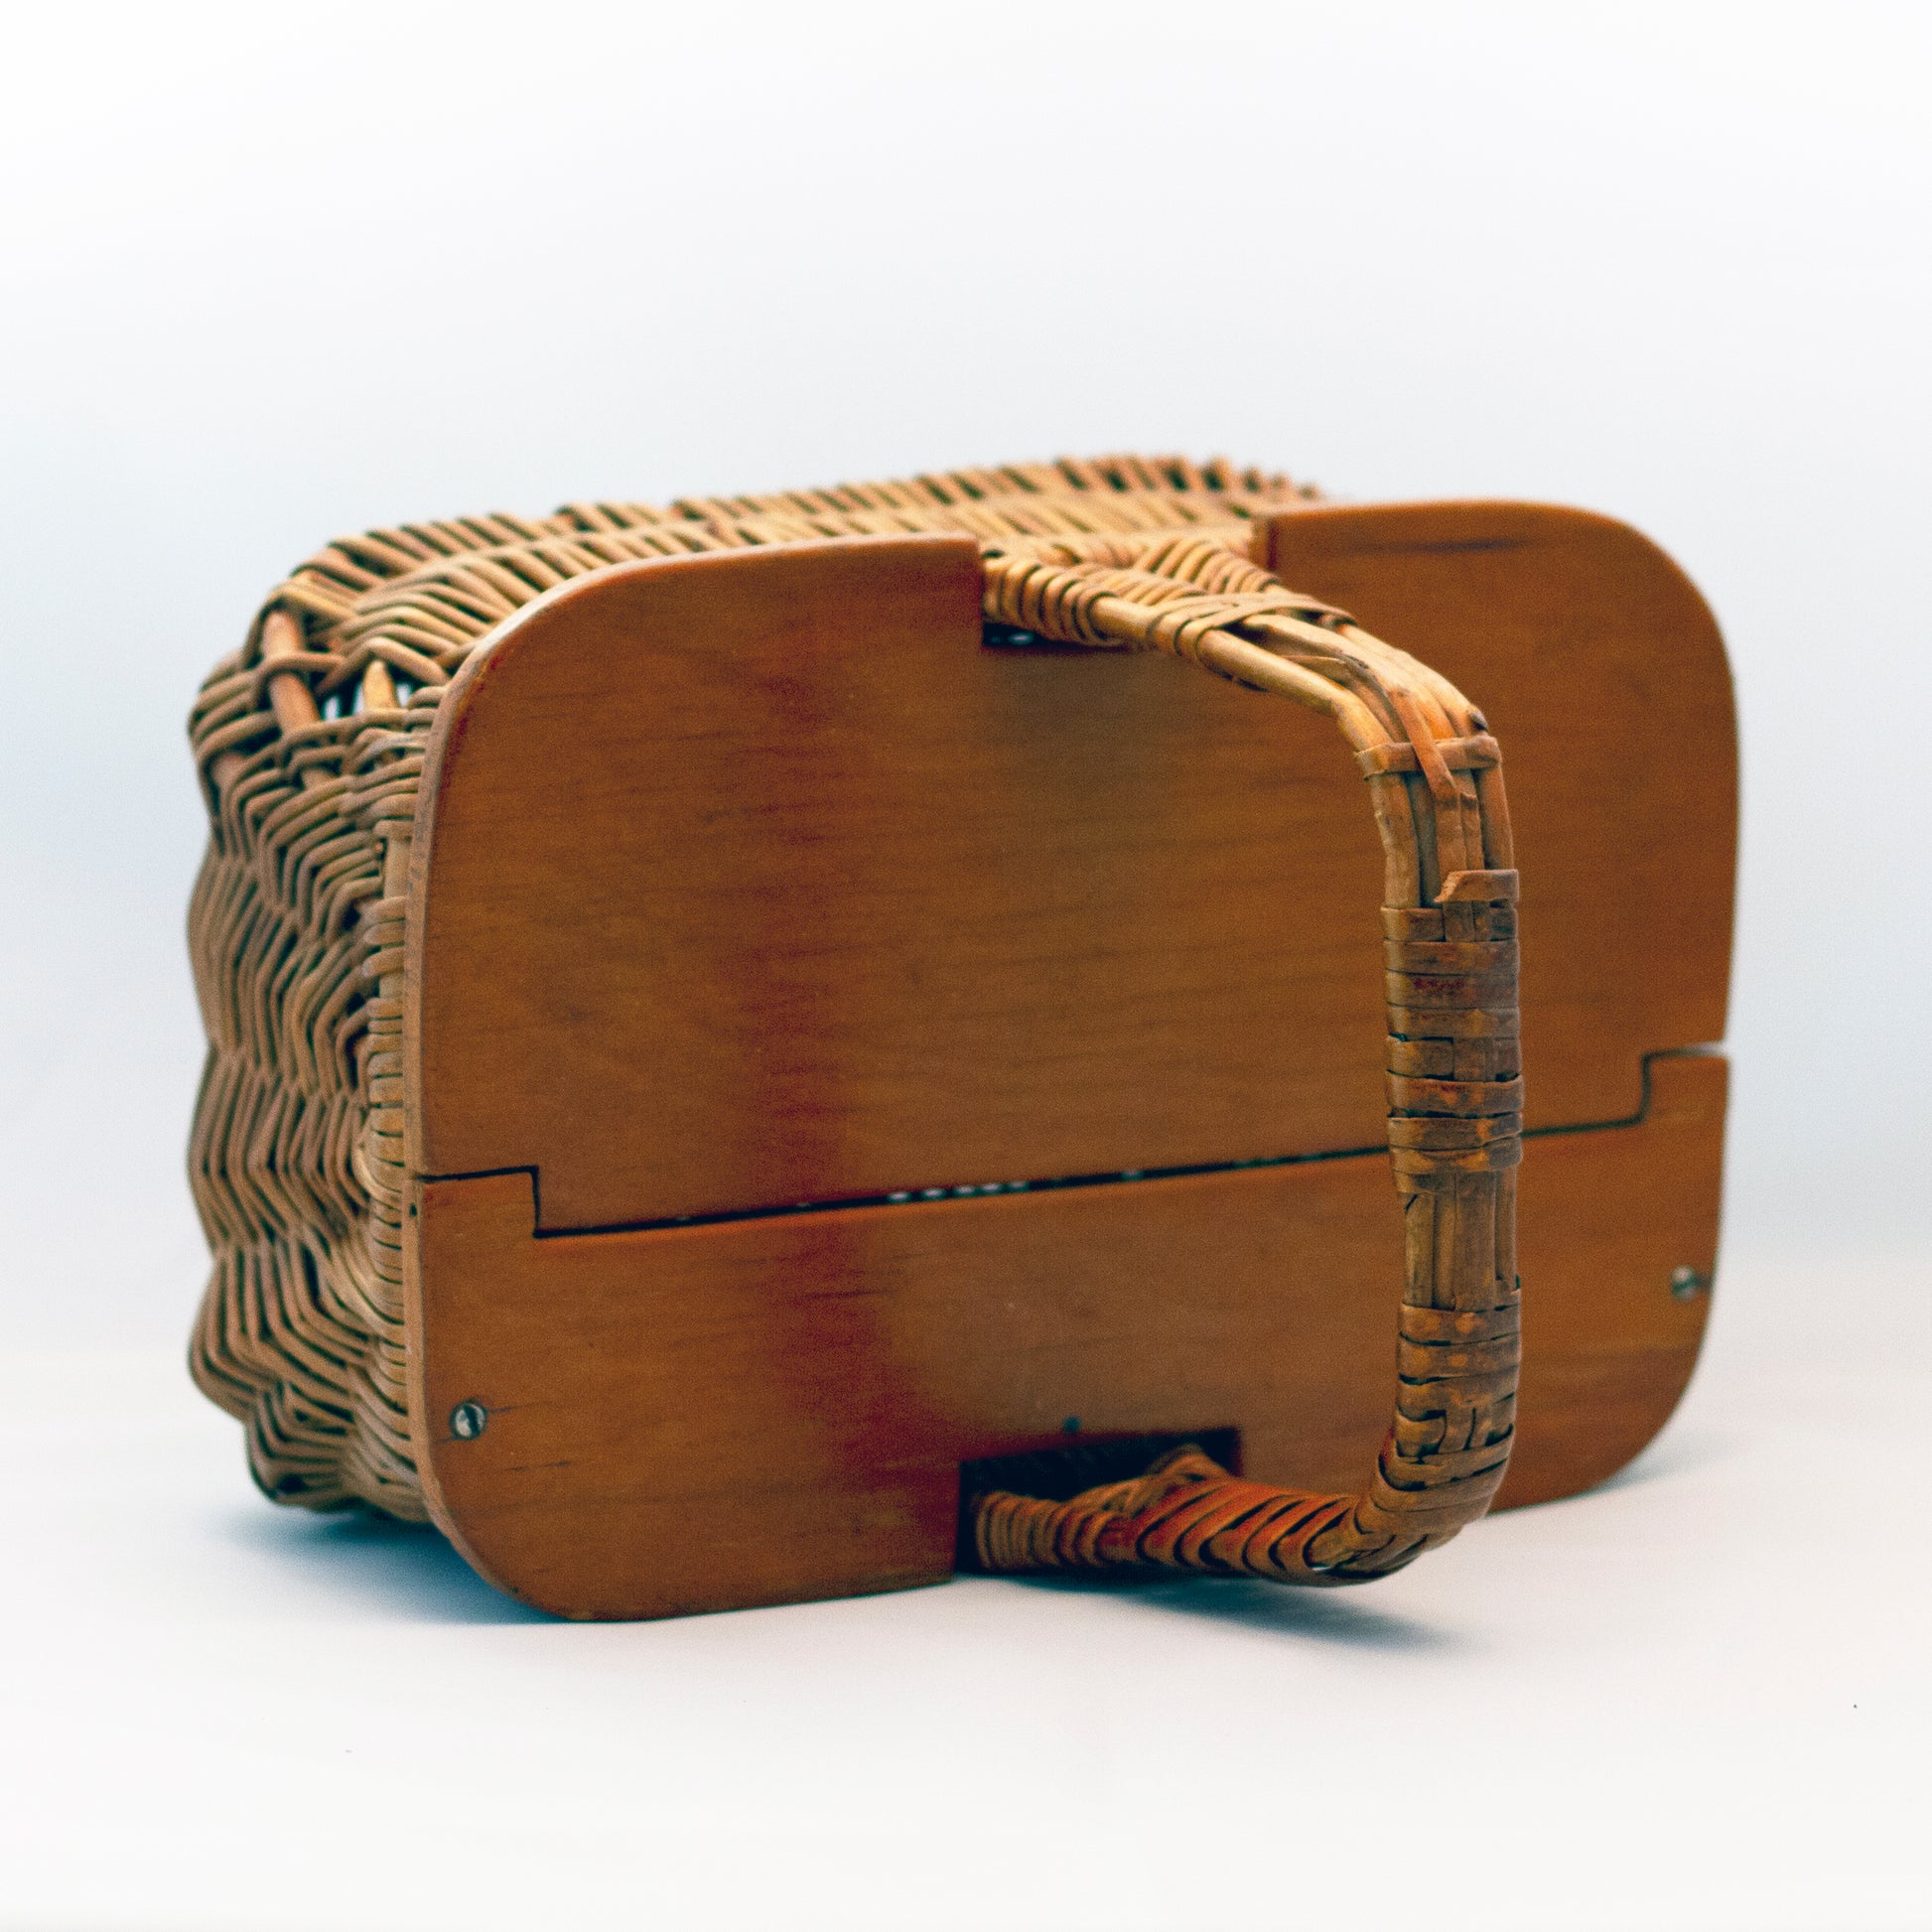 Natural RATTAN WICKER BASKET PURSE WITH HINGED WOOD LID Circa 1970s